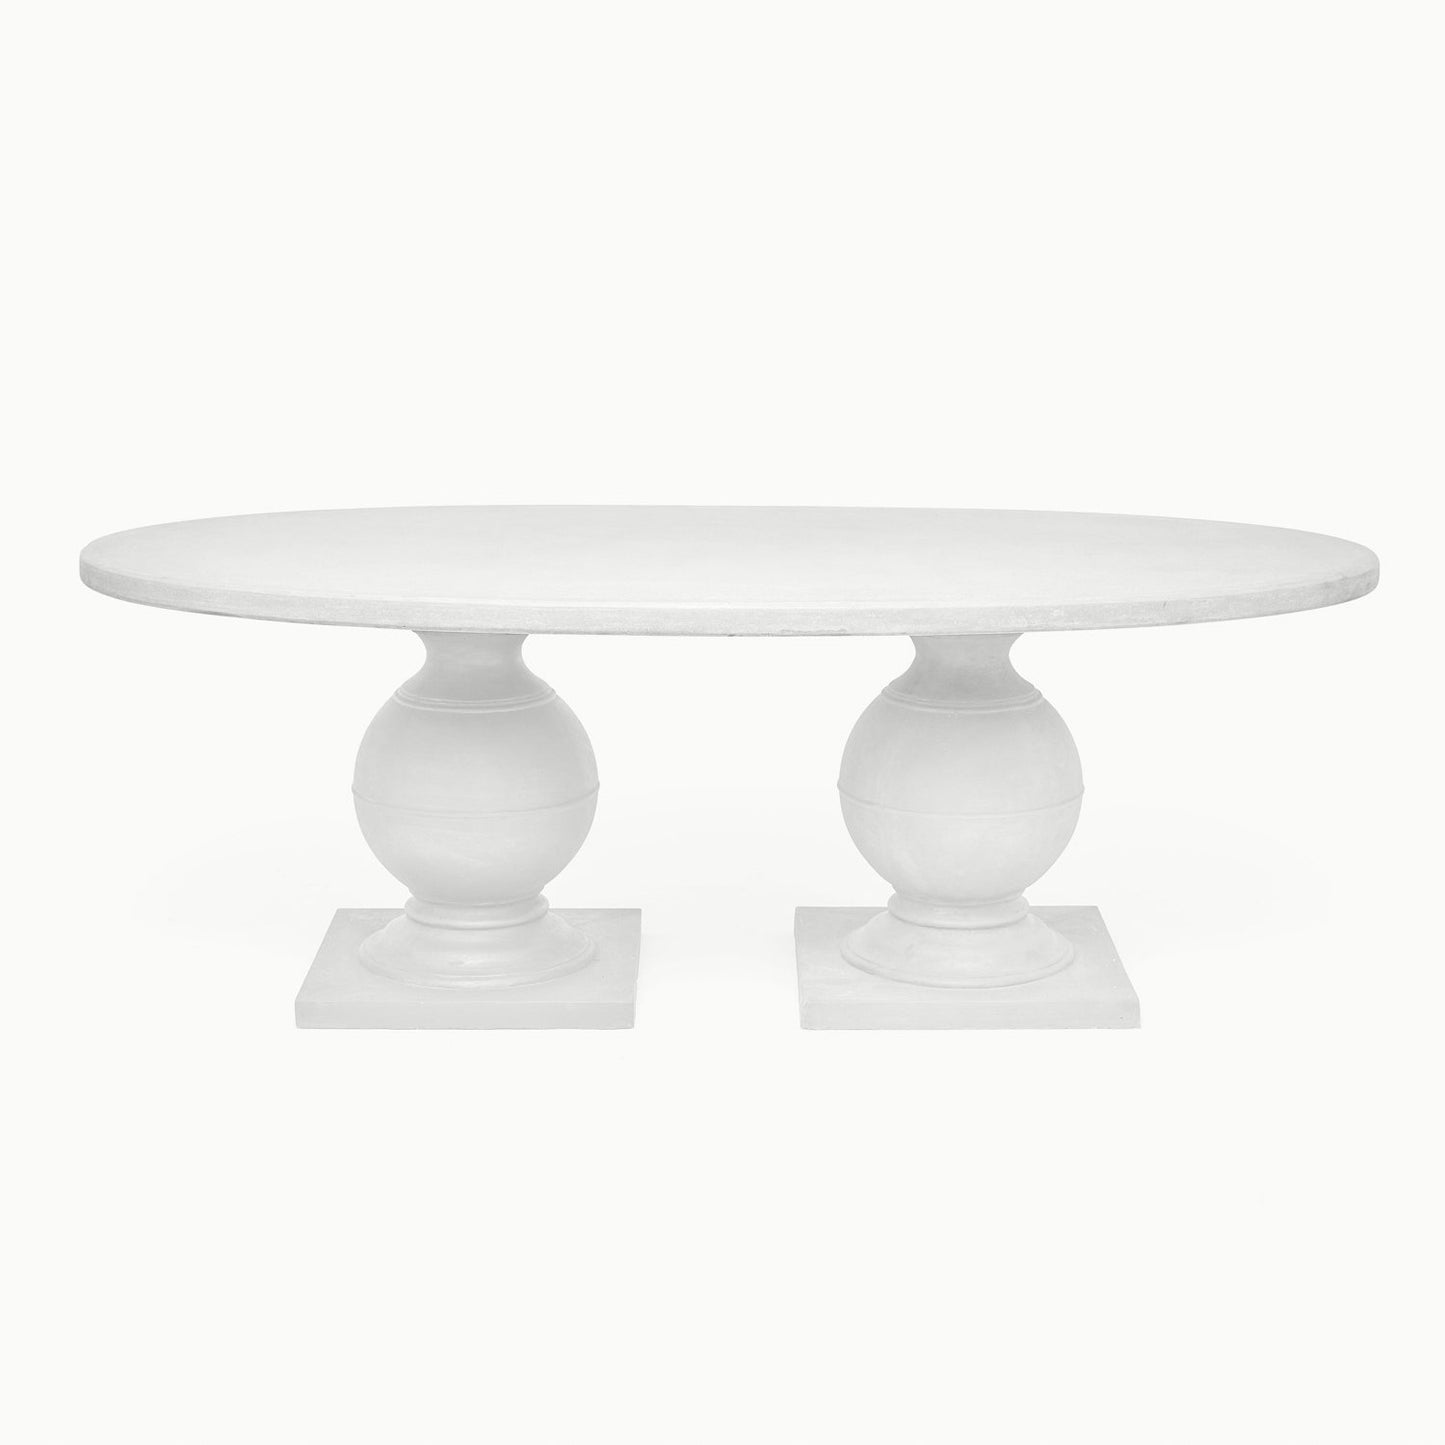 Cyril Oval Dining Table White Plaster Concrete - multiple options